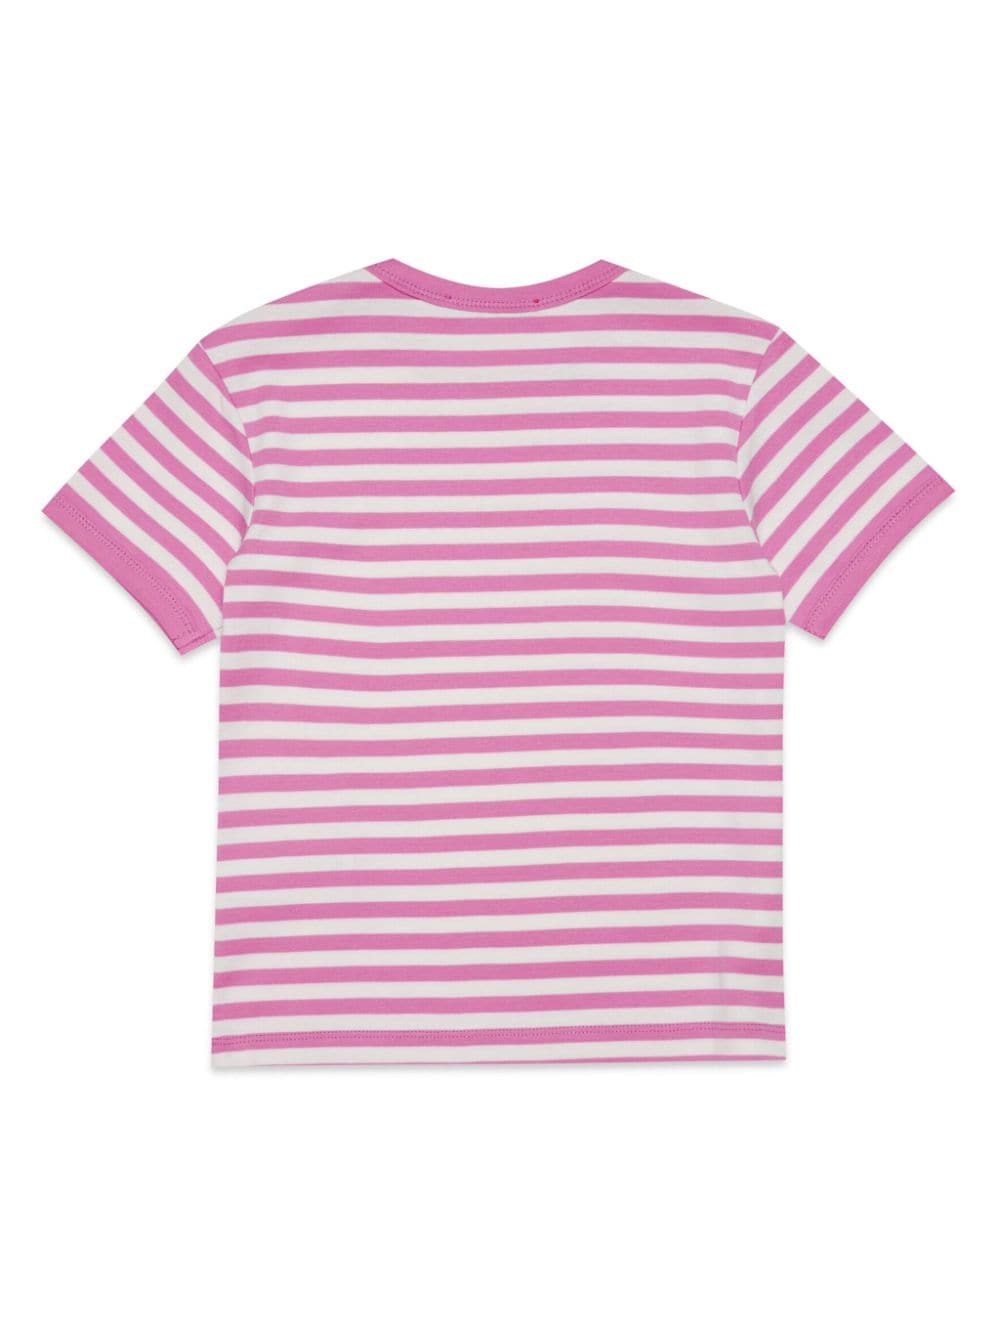 White and pink t-shirt for girls with logo